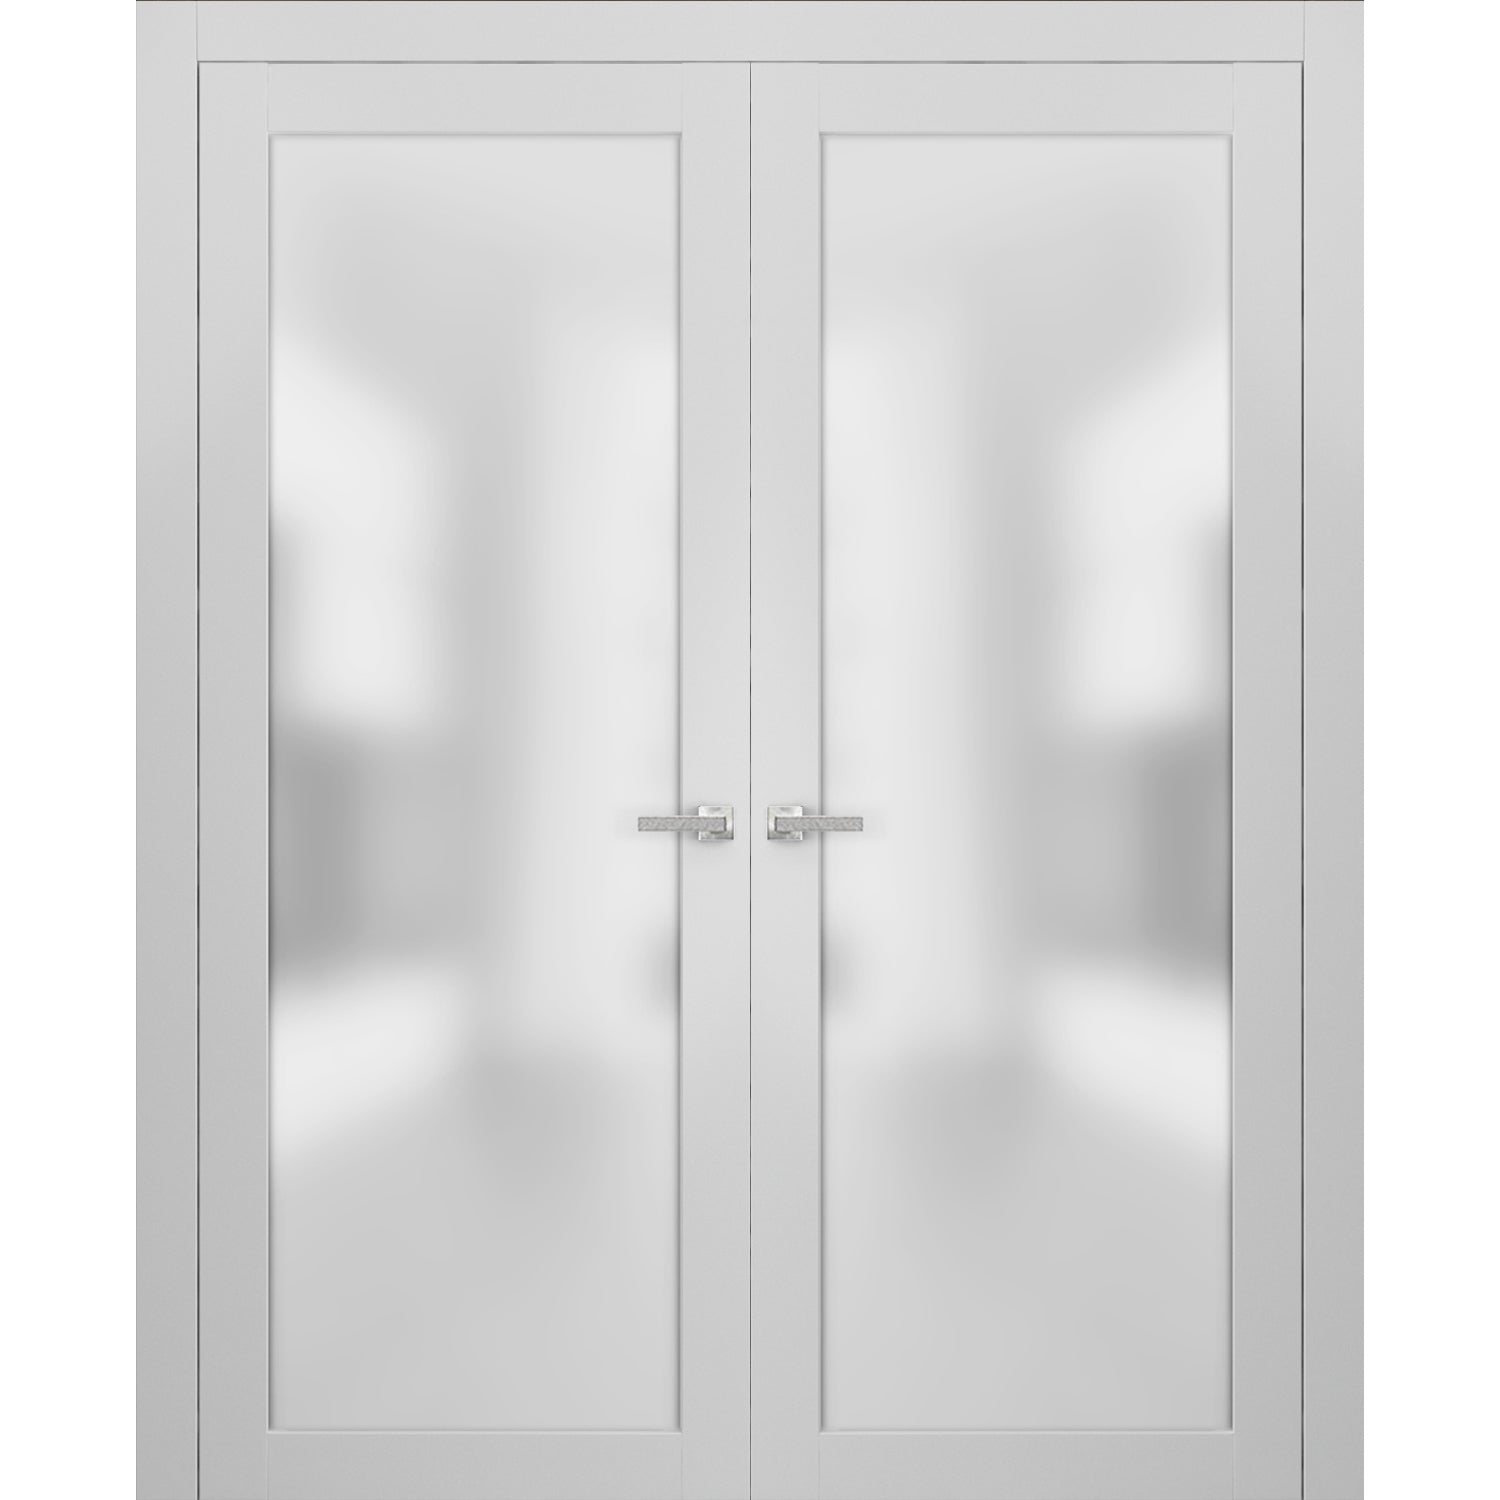 SARTODOORS French Double Frosted Glass Doors 48 x 84 | Planum 2102 White Silk | Frames Satin Nickel Hardware | Wooded Panels with Inserts 